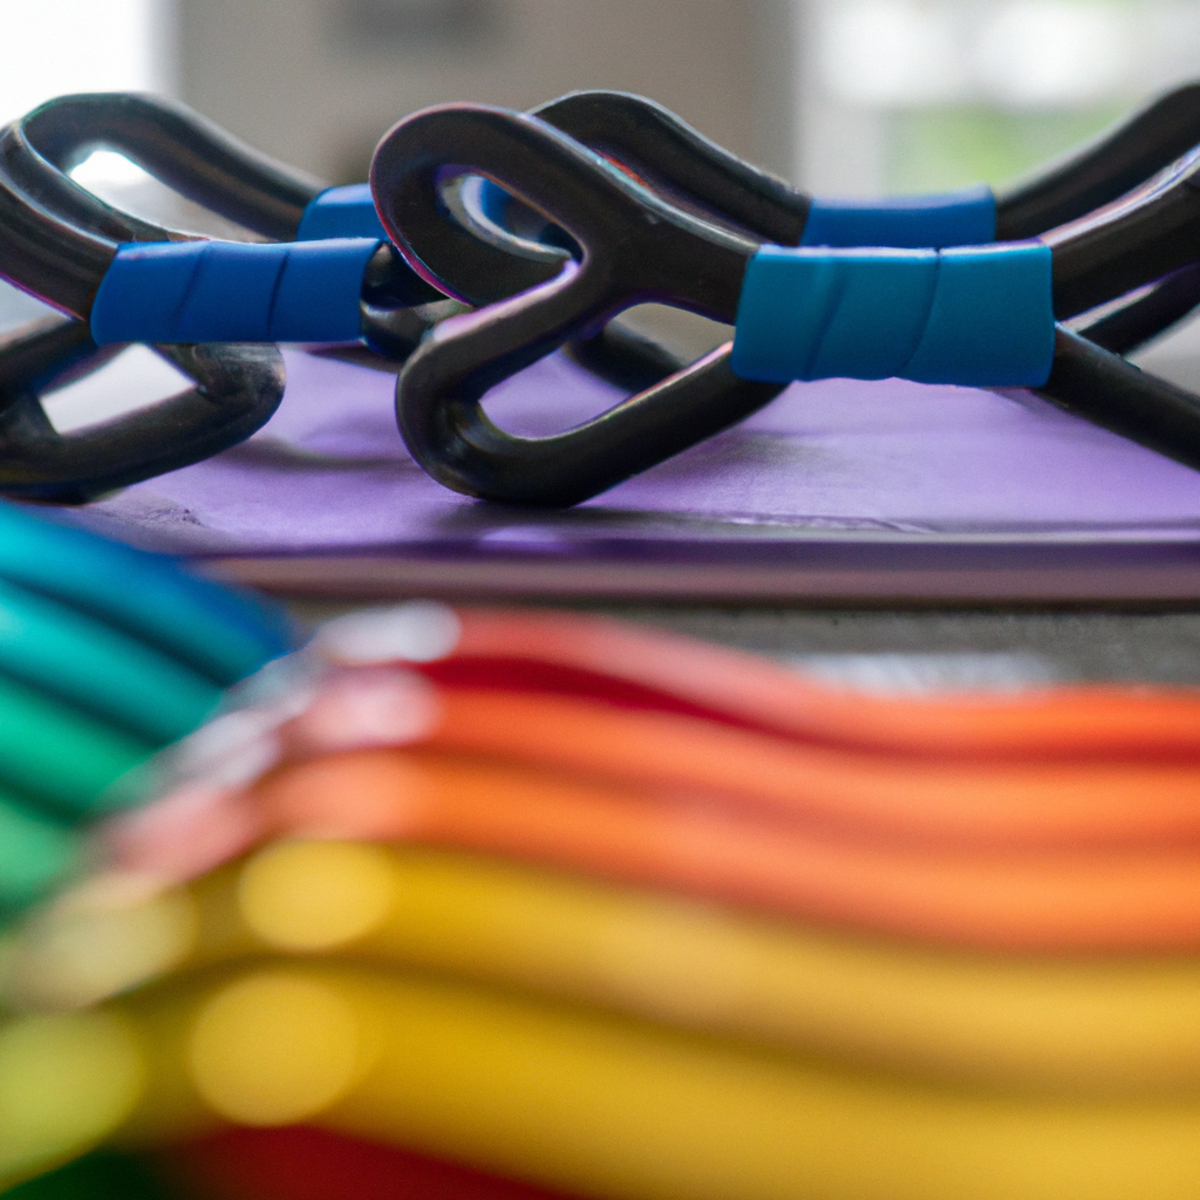 The photo captures a set of colorful resistance bands arranged neatly on a yoga mat. The bands vary in thickness and tension, providing a range of options for different levels of resistance training. A pair of dumbbells sit on either side of the mat, their shiny chrome surfaces reflecting the light. In the background, a blurred image of a person can be seen, suggesting the potential for a challenging workout. The composition of the photo is clean and inviting, encouraging readers to try out the resistance training workouts described in the article.